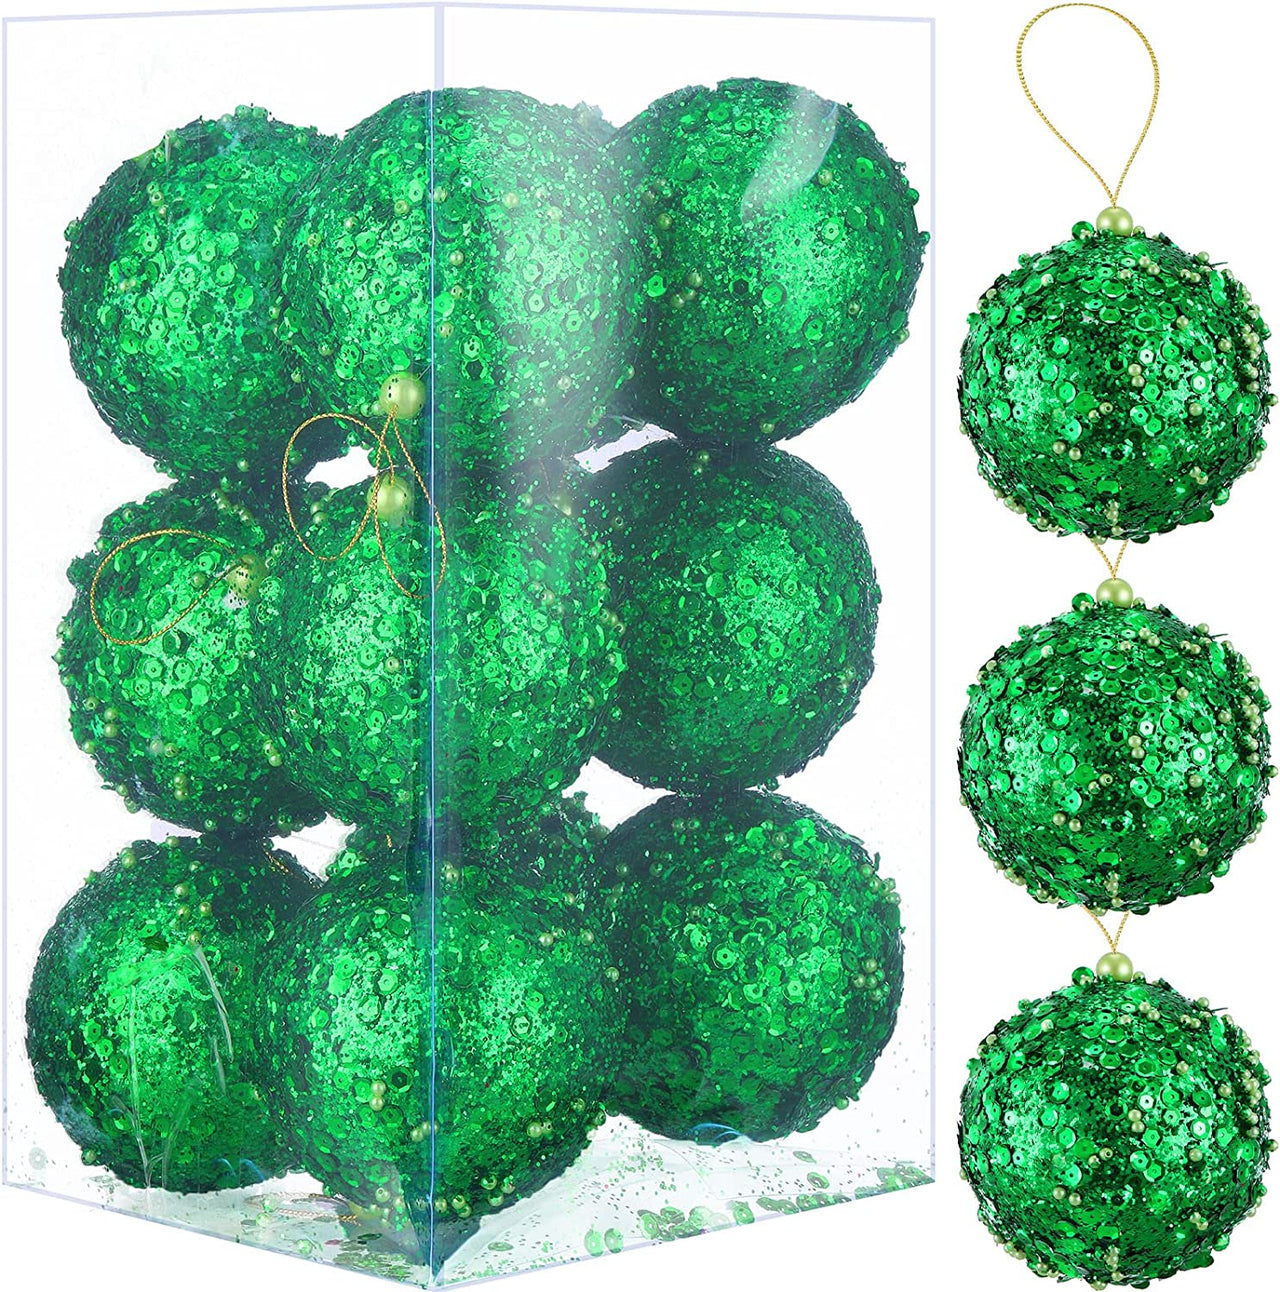 12 Pieces 4.25 Inch Christmas Ball Ornaments Christmas Tree Hanging Balls Glitter Sequin Xmas Tree Baubles Set for Holiday Party Decorations